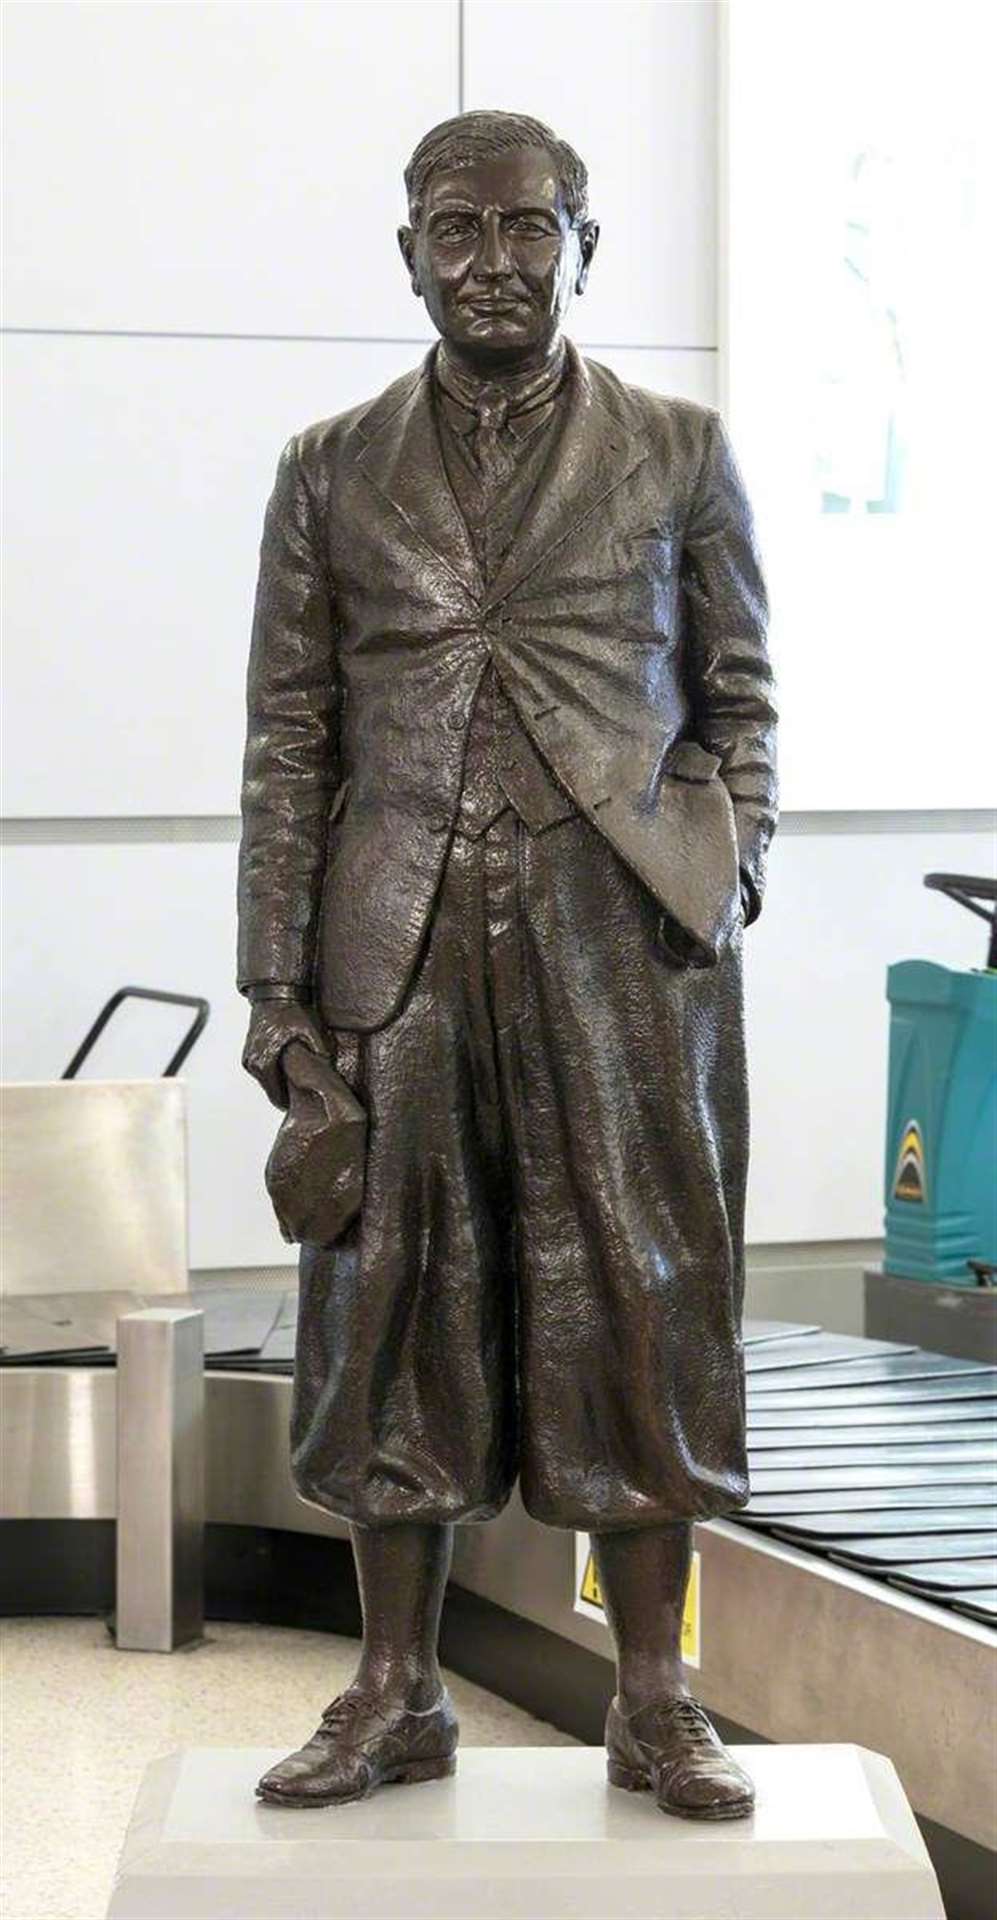 A statue of Ted Fresson stands in the arrivals section of Inverness Airport.